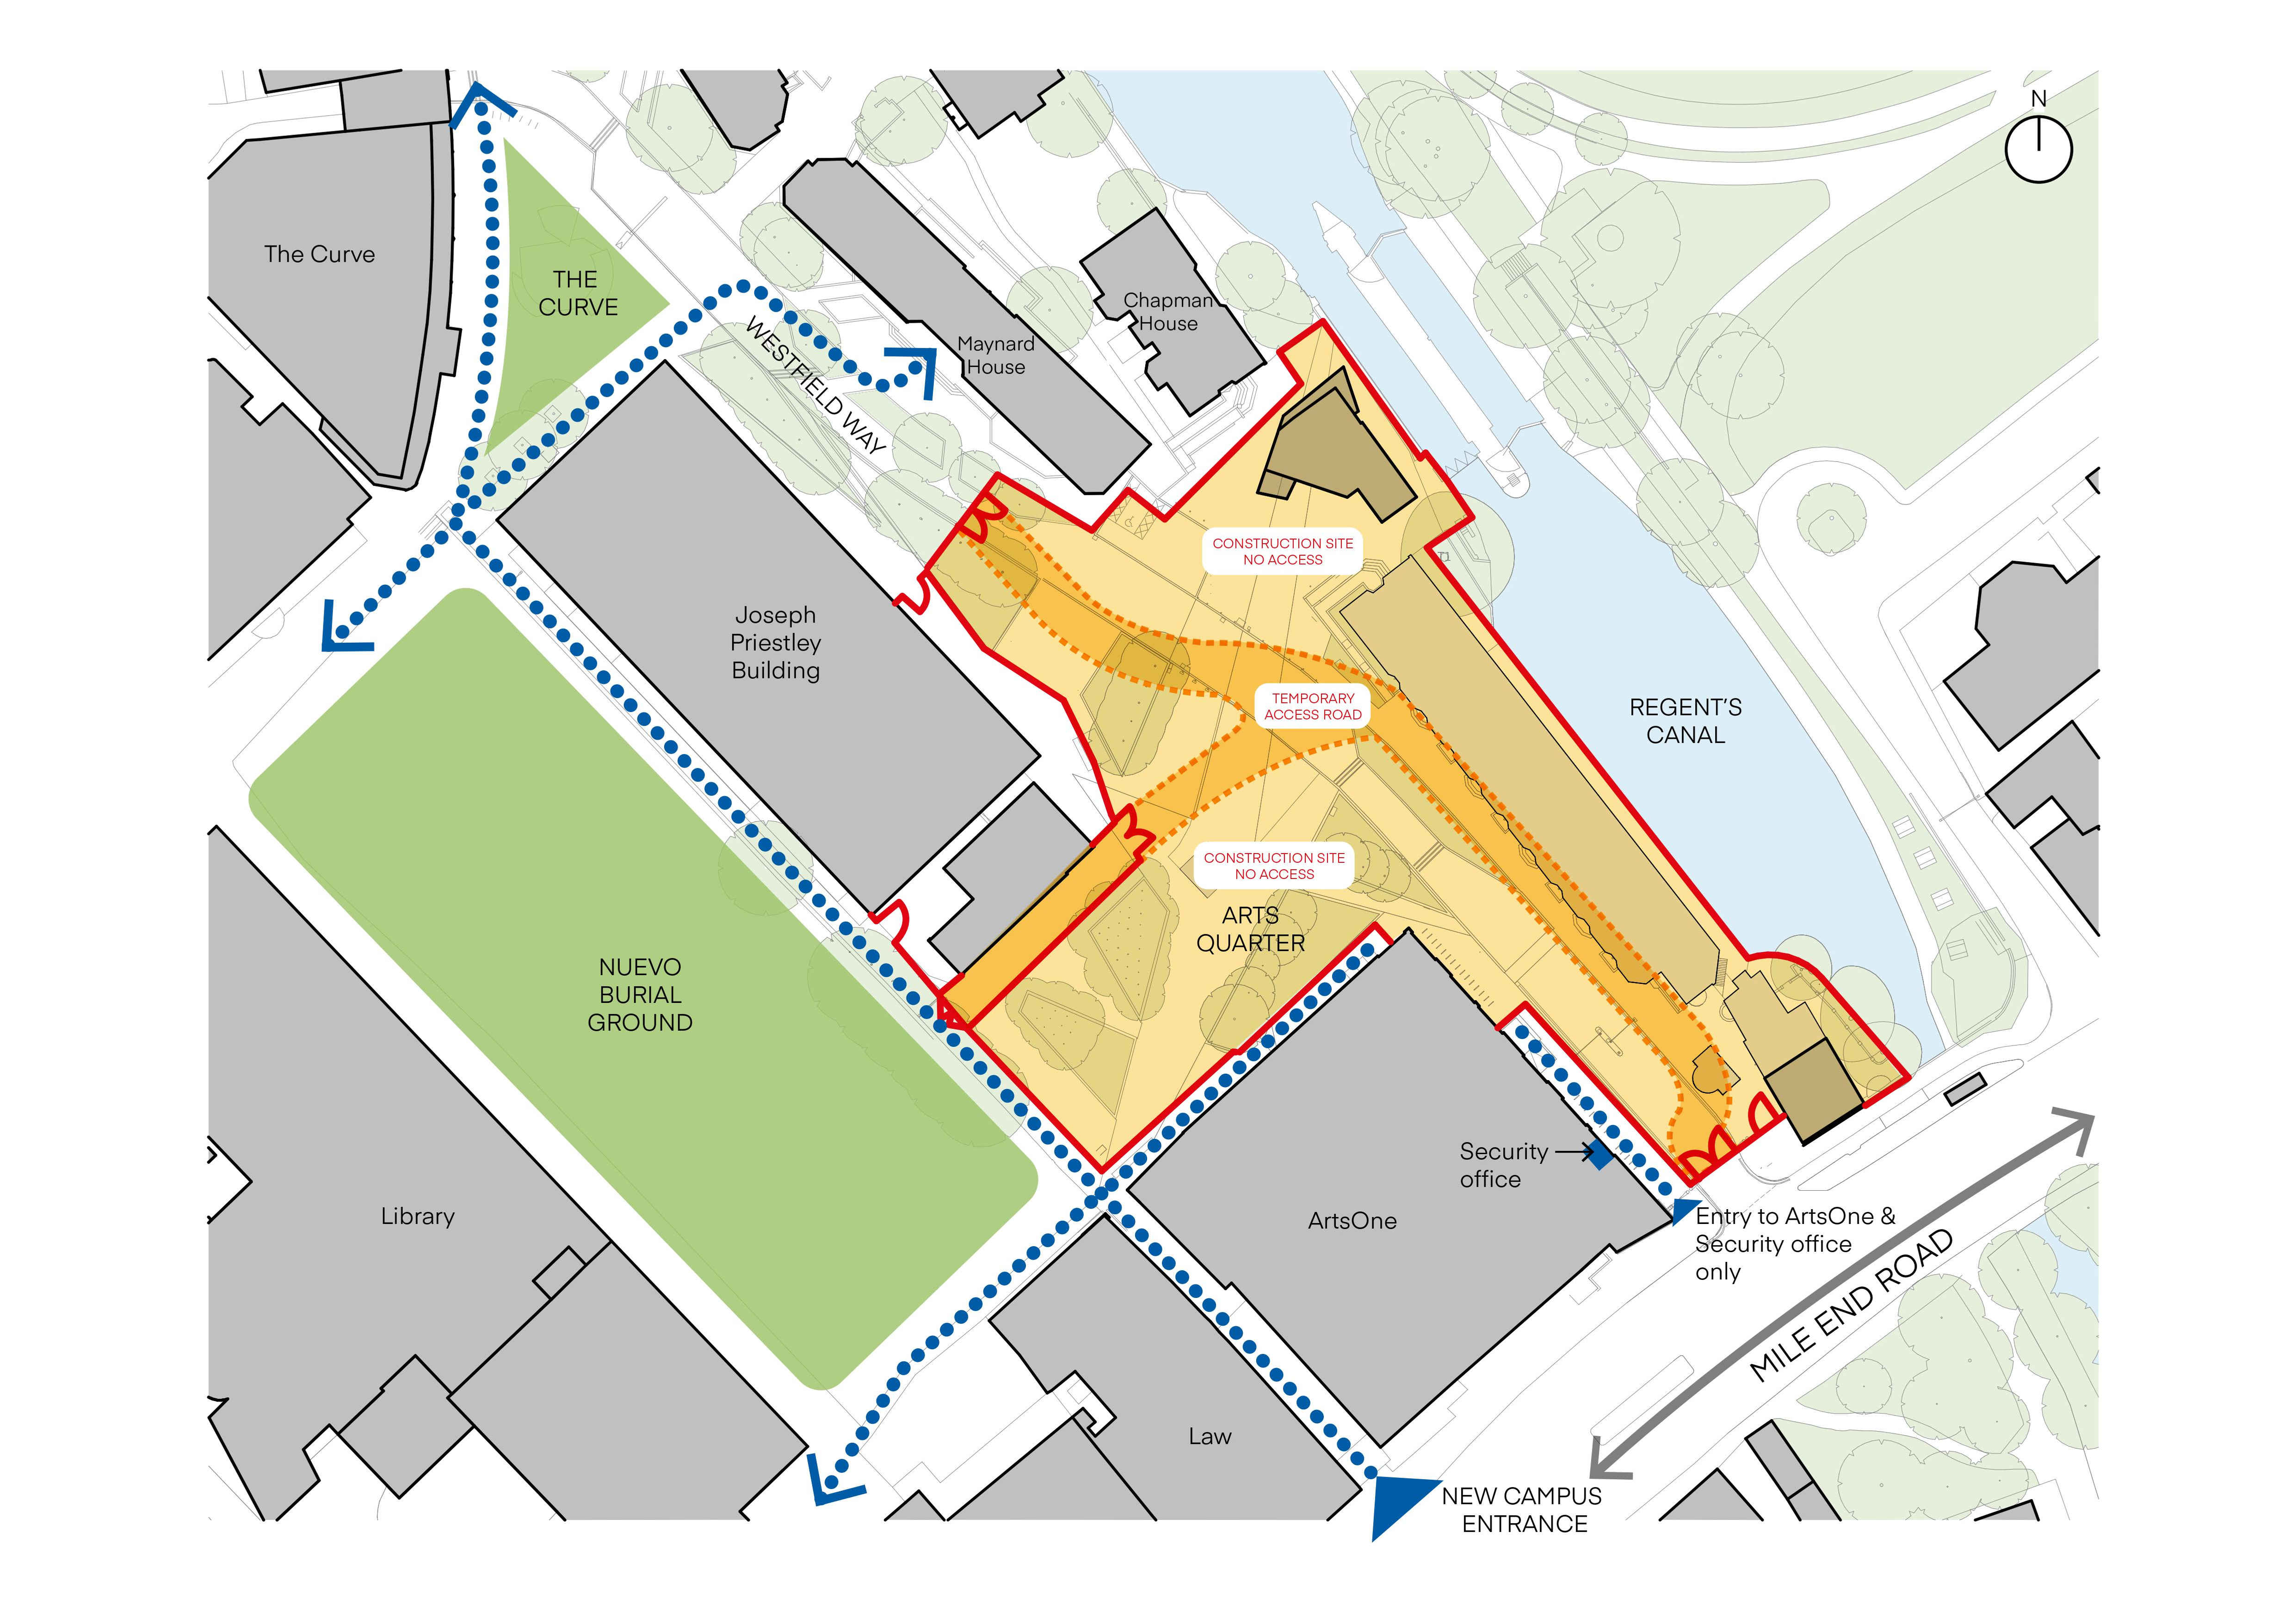 A plan showing the pedestrian routes into Queen Mary from Westfield Way